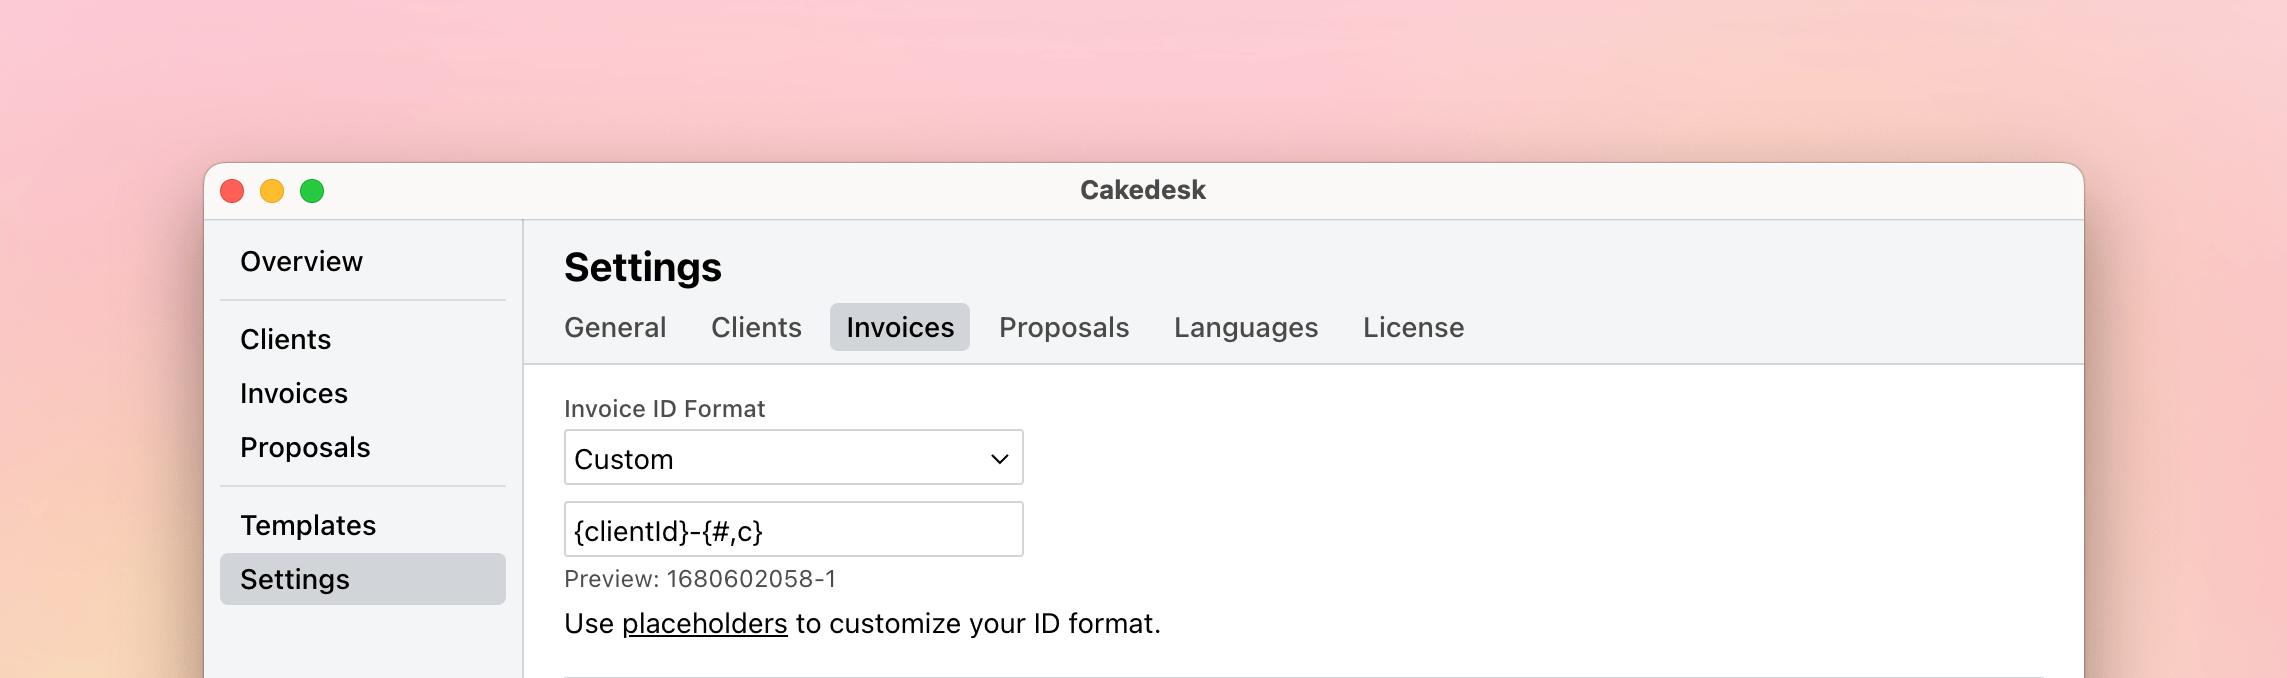 Cakedesk invoice settings showing off a custom ID format.